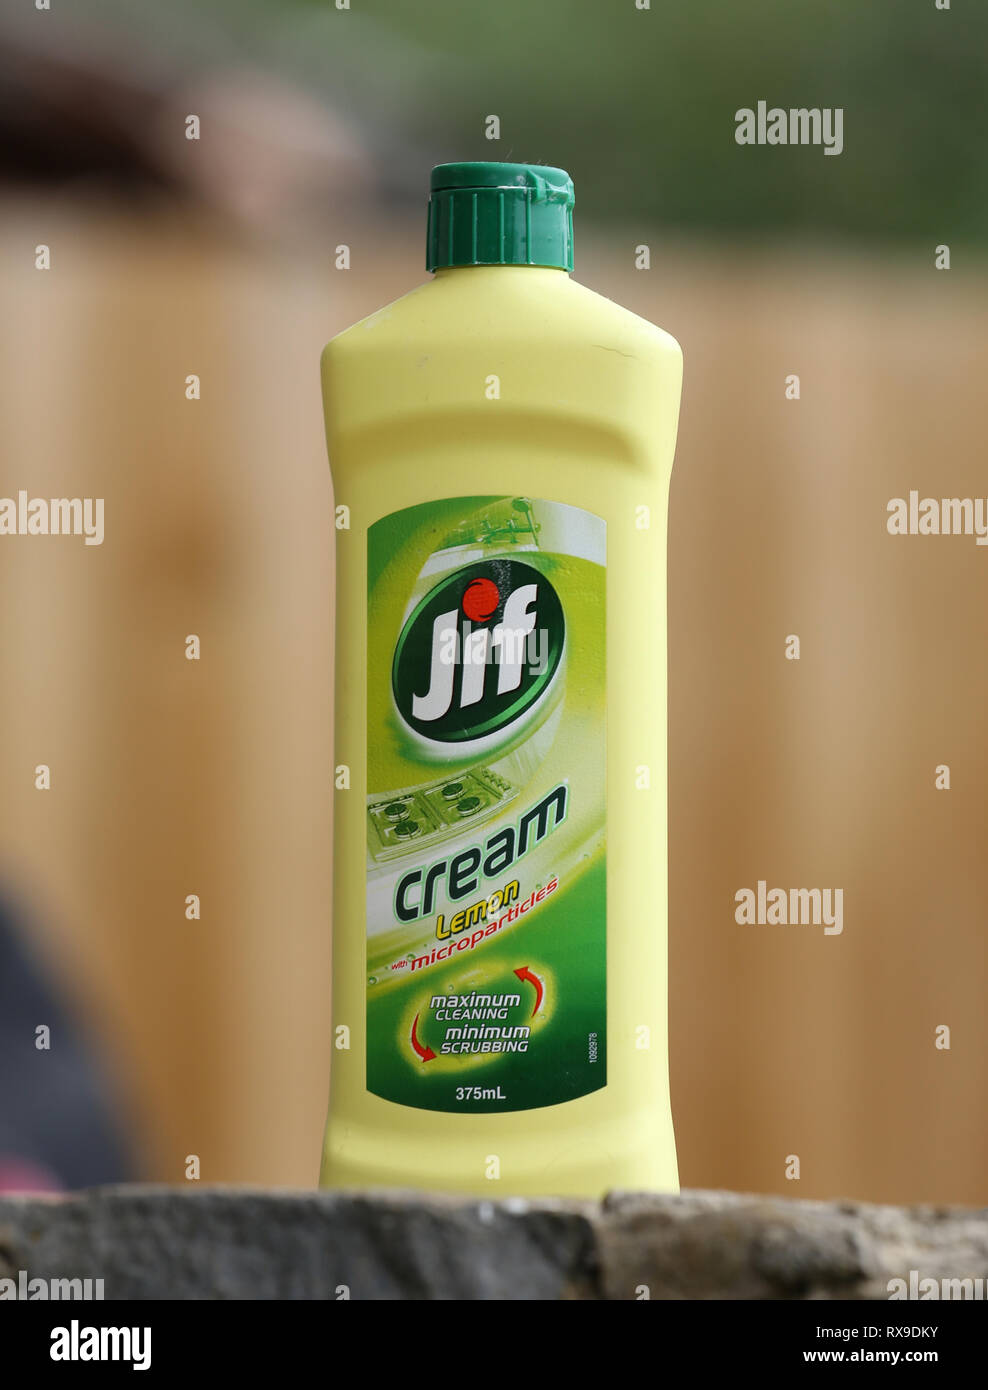 https://c8.alamy.com/comp/RX9DKY/we-used-to-call-this-cream-cleaner-jif-in-europe-but-now-its-cif!-still-the-proper-stuff-in-the-antipodes-RX9DKY.jpg